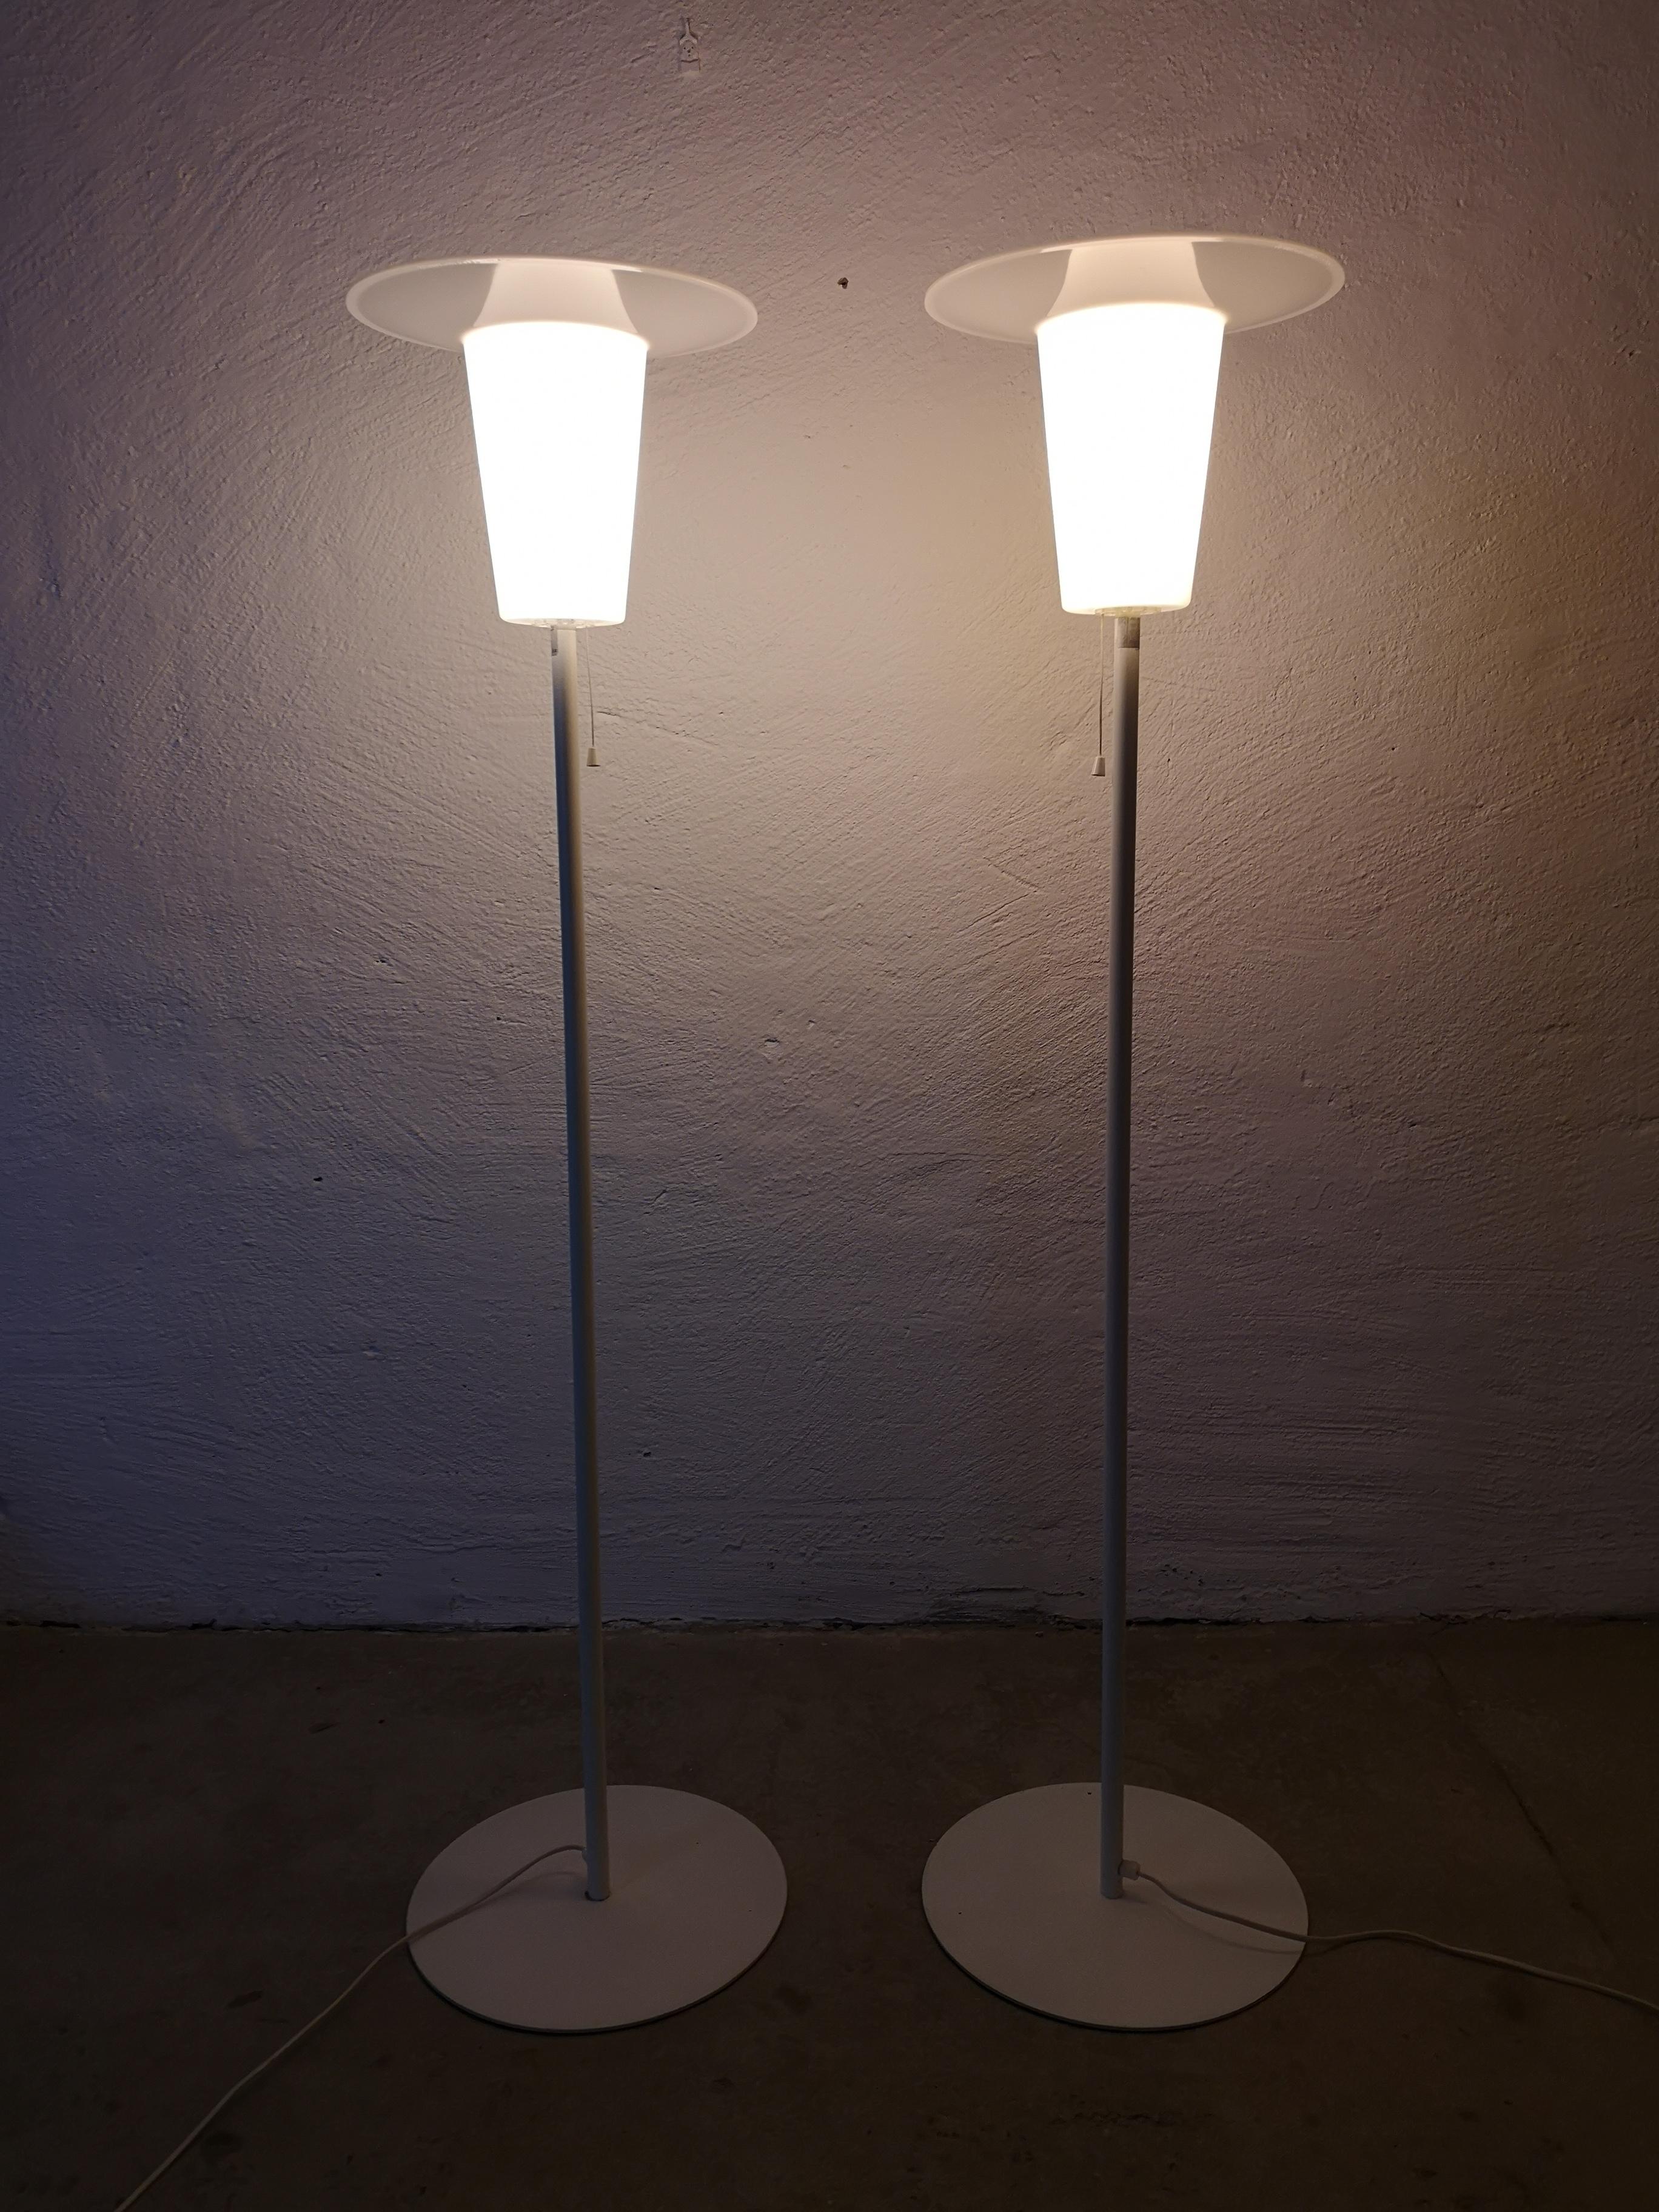 Two floor lamps maufacutred in sweden and Luxus. They are made in white with an iron cast base. The uplight shades are in acrylic. Its possible to put at shade on top of the plastic shades or just leave it as an uplight lamp. 

Nice vintage